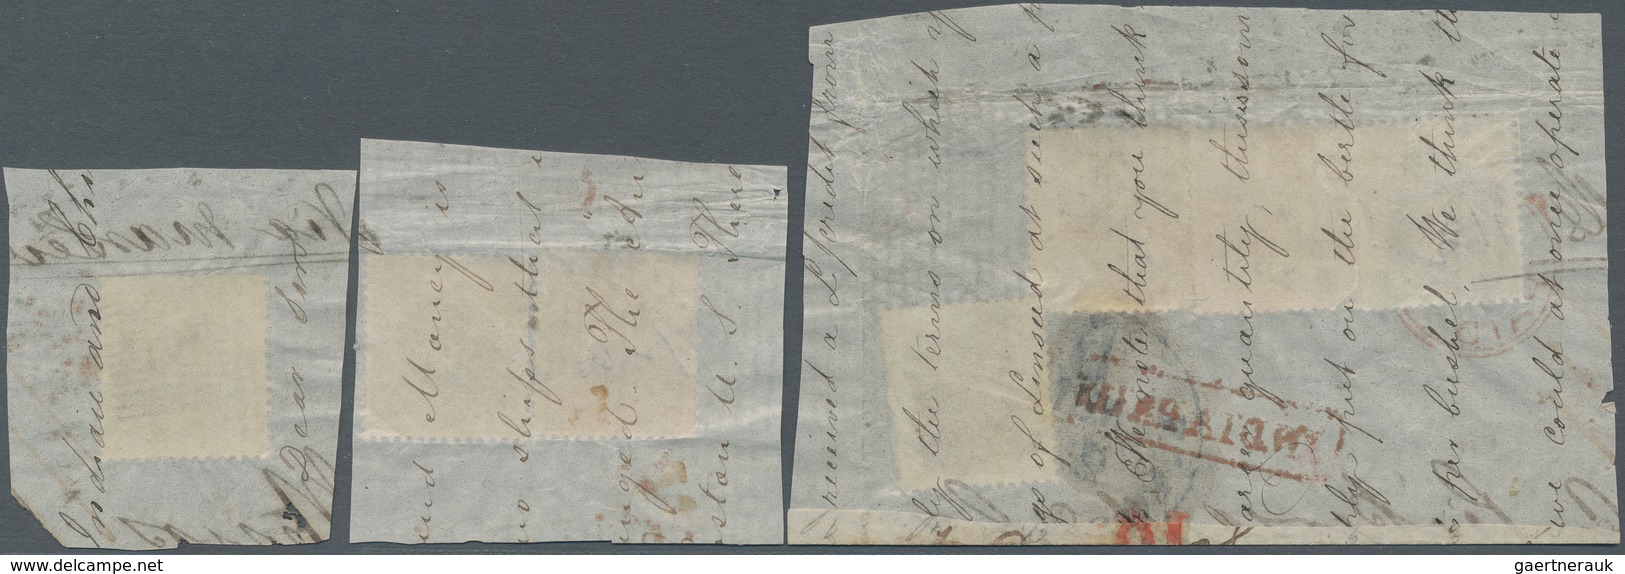 Indien: 1855-1864, Multi-colour franking fragments from a correspondence from India to the United St